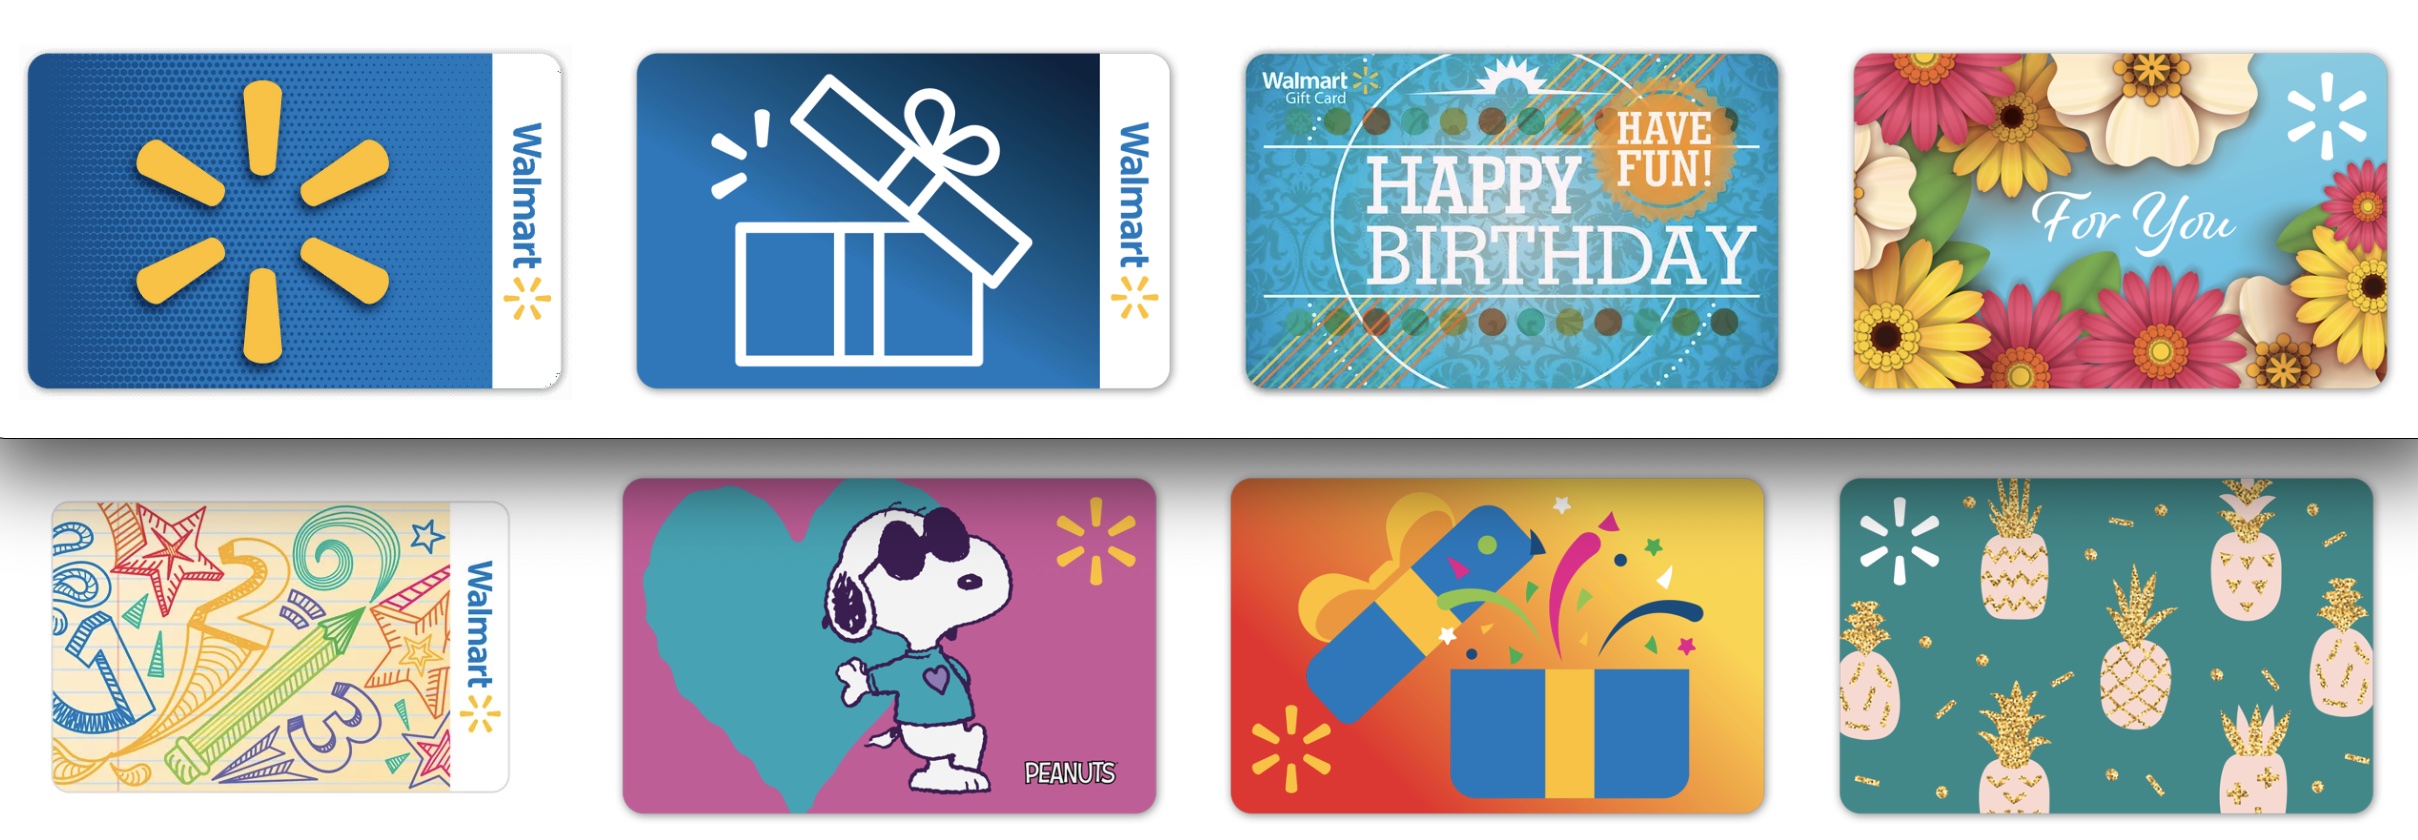 Can I Use Walmart Gift Card to Buy Gift Card?